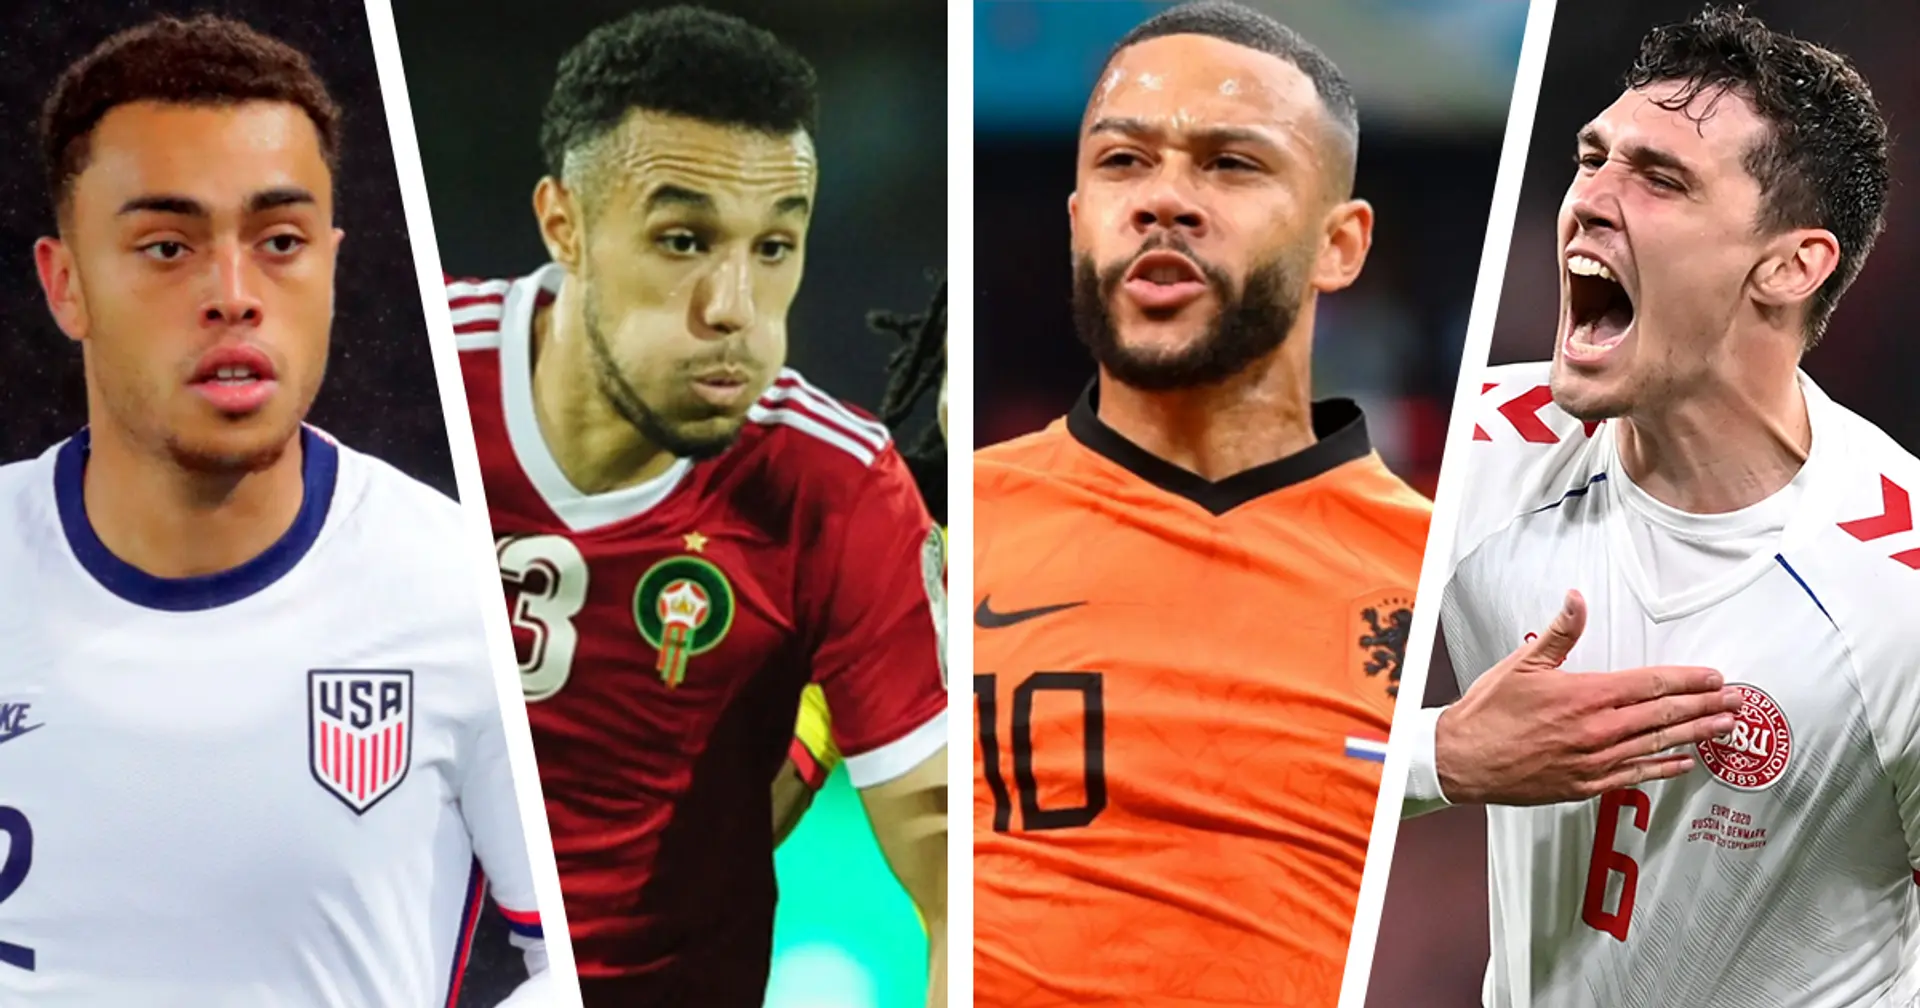 31 Barca players who could feature at 2022 World Cup – including potential new signings